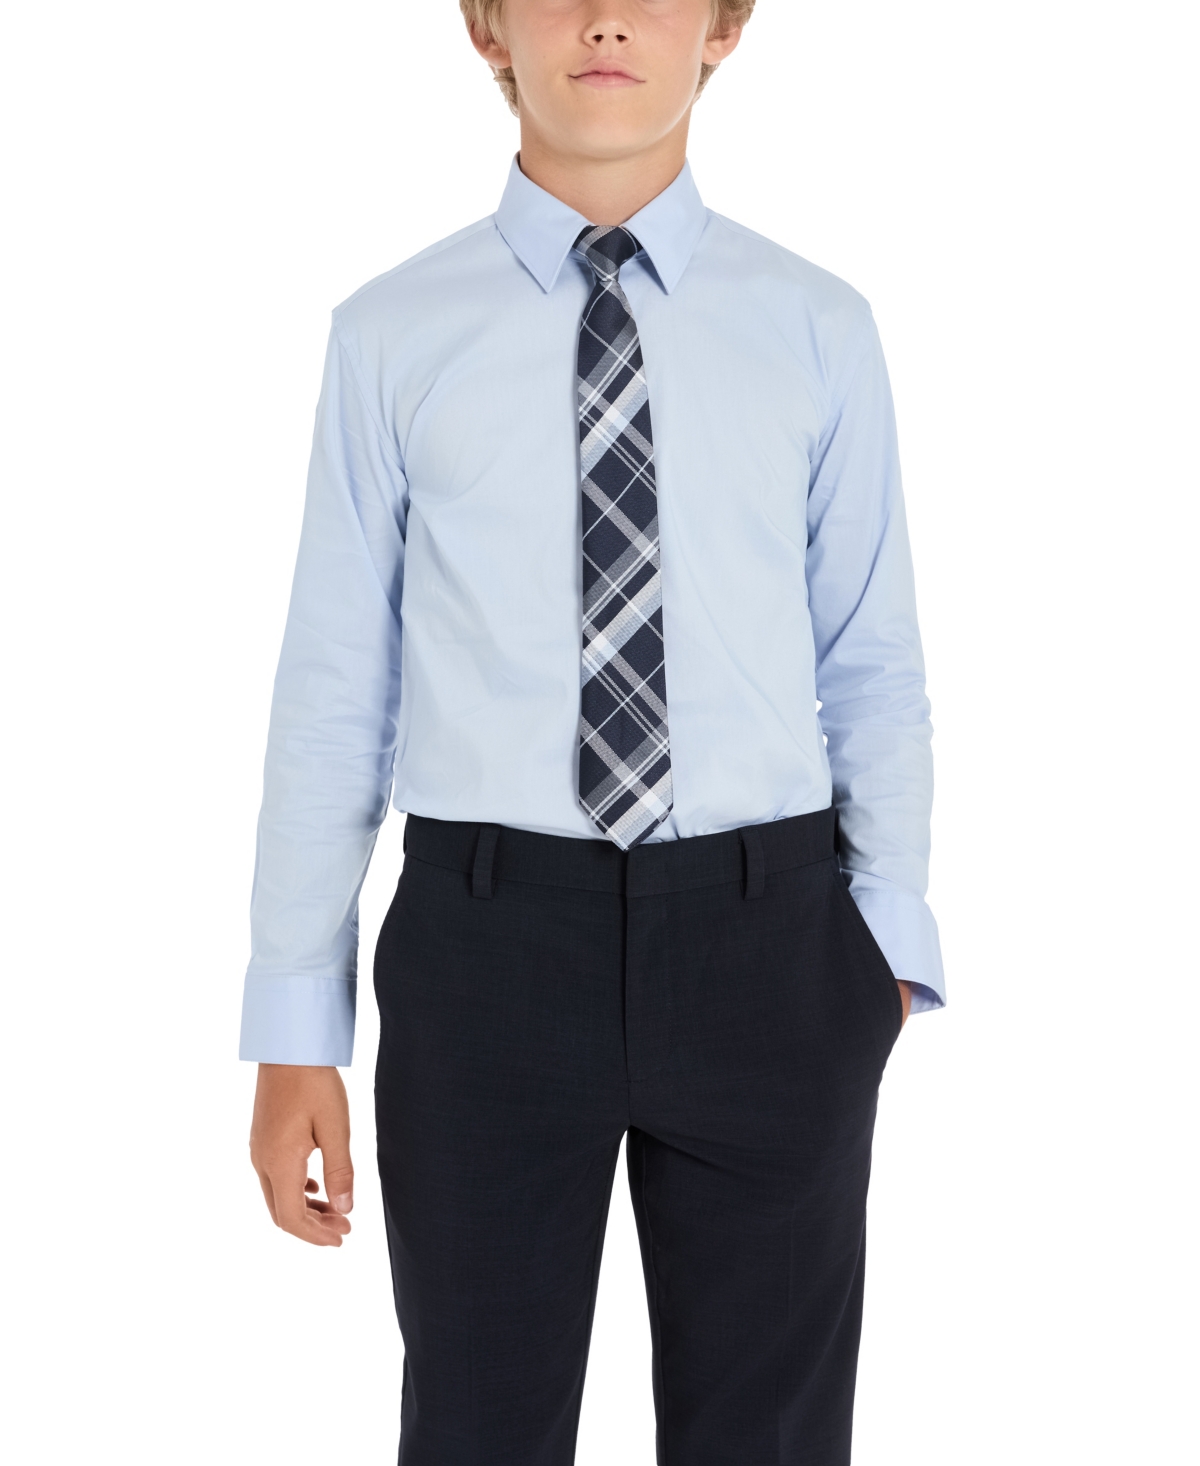 Kenneth Cole Reaction Kids' Big Boys Solid Classic Shirt And Tie Set In Blue,navy